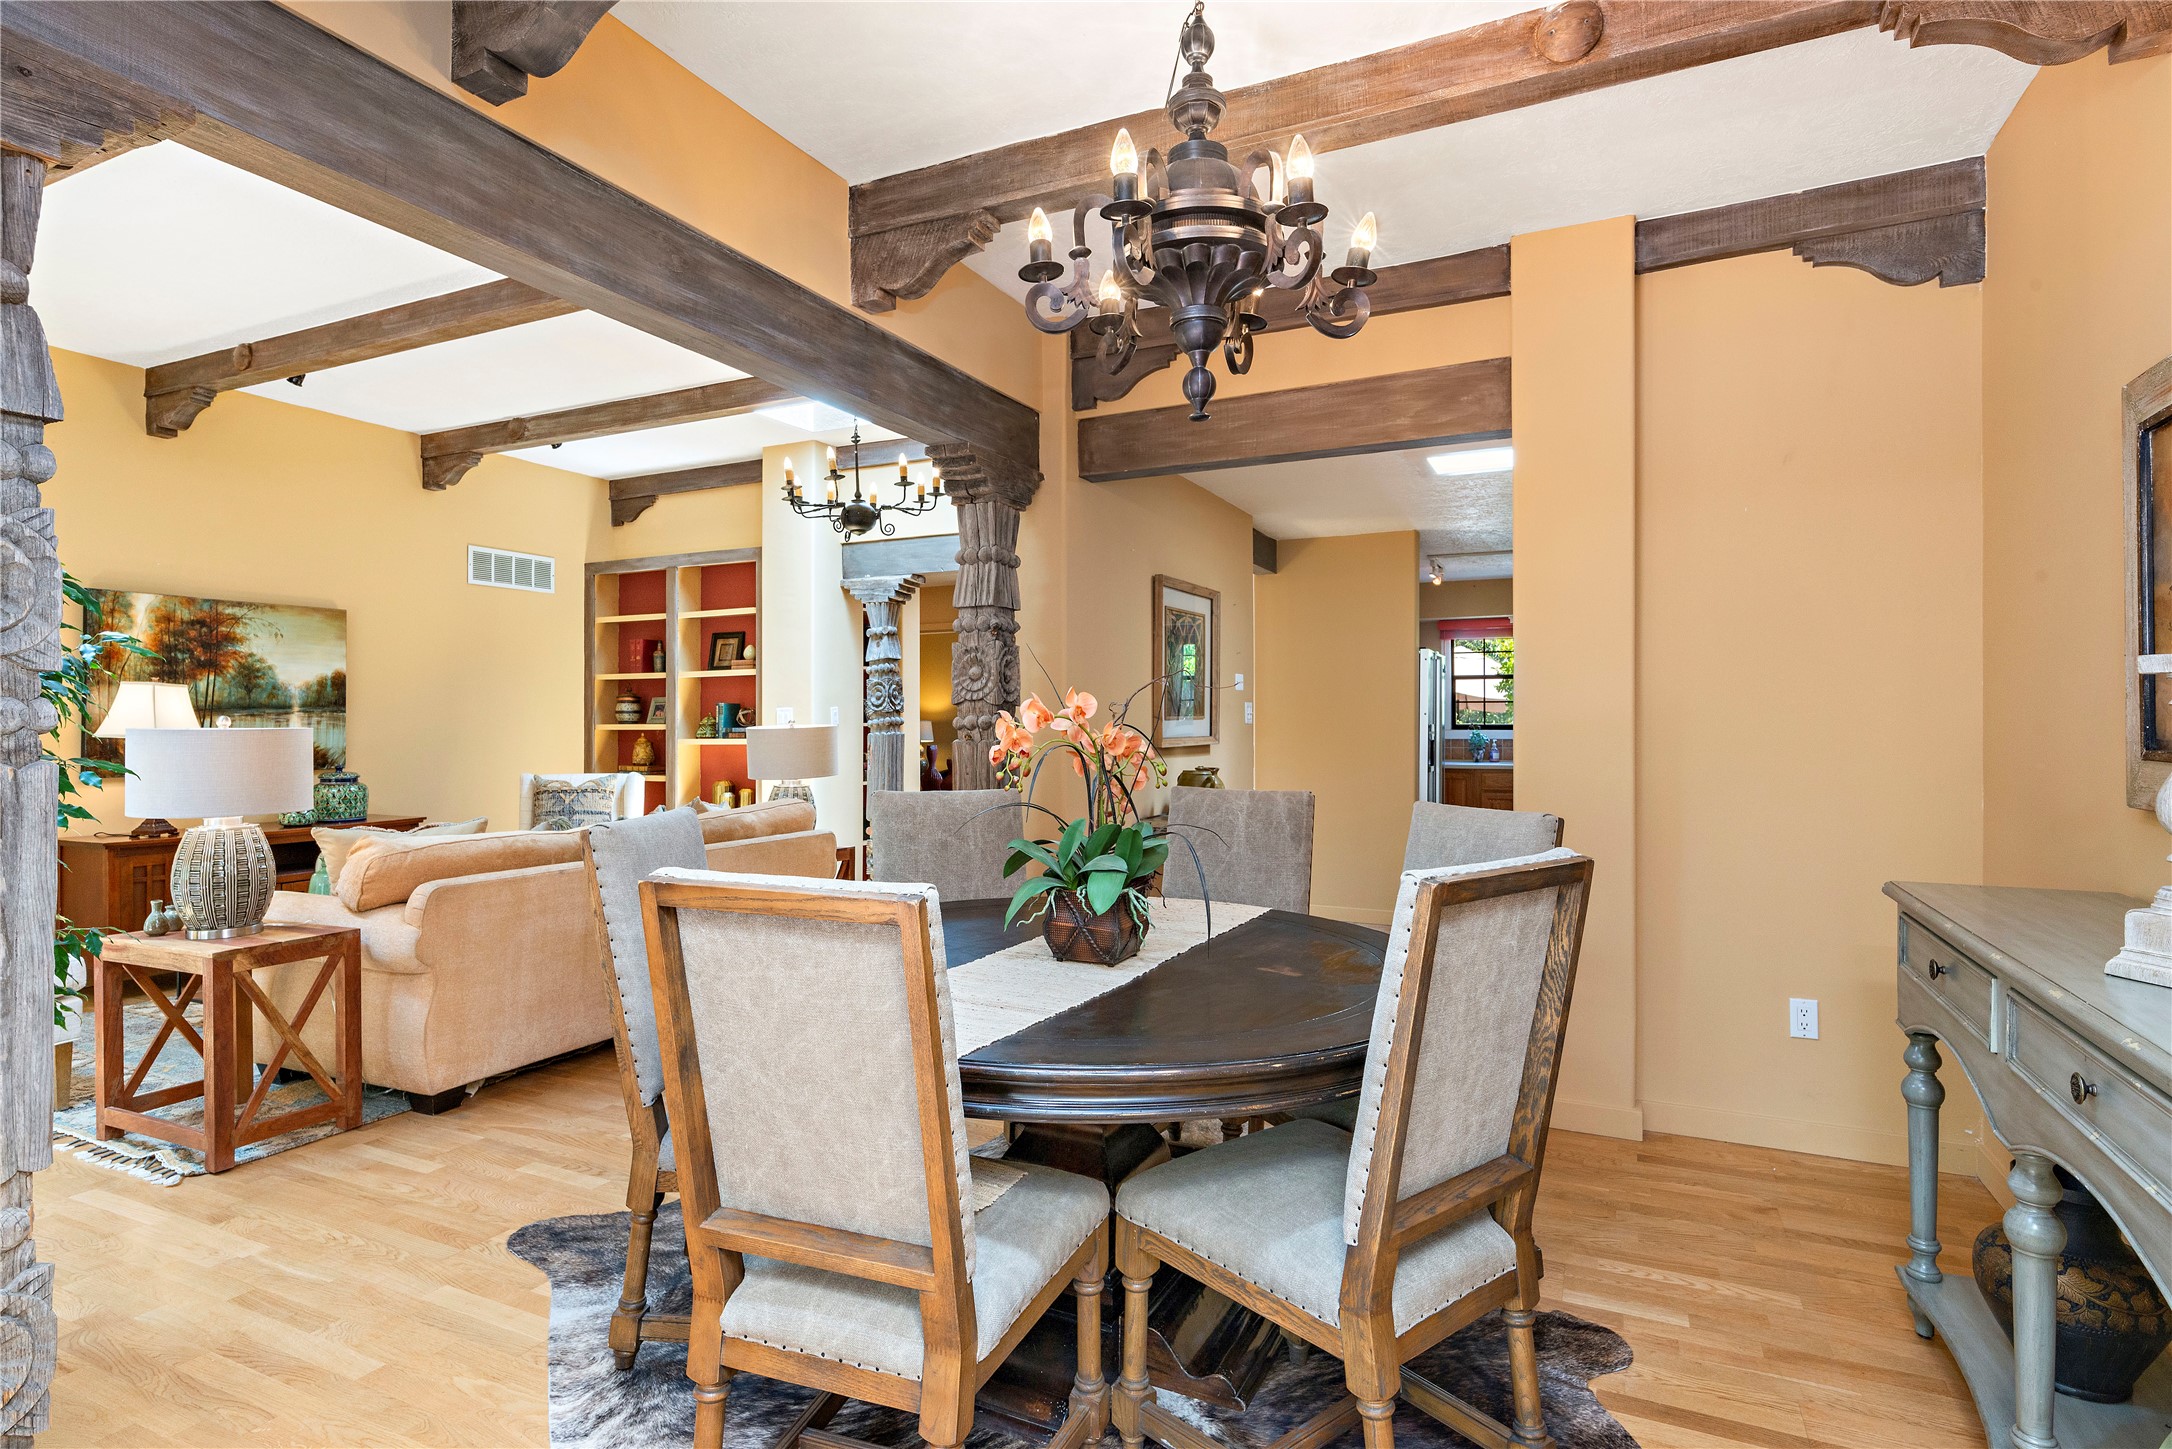 Spacious dining room with high ceiling